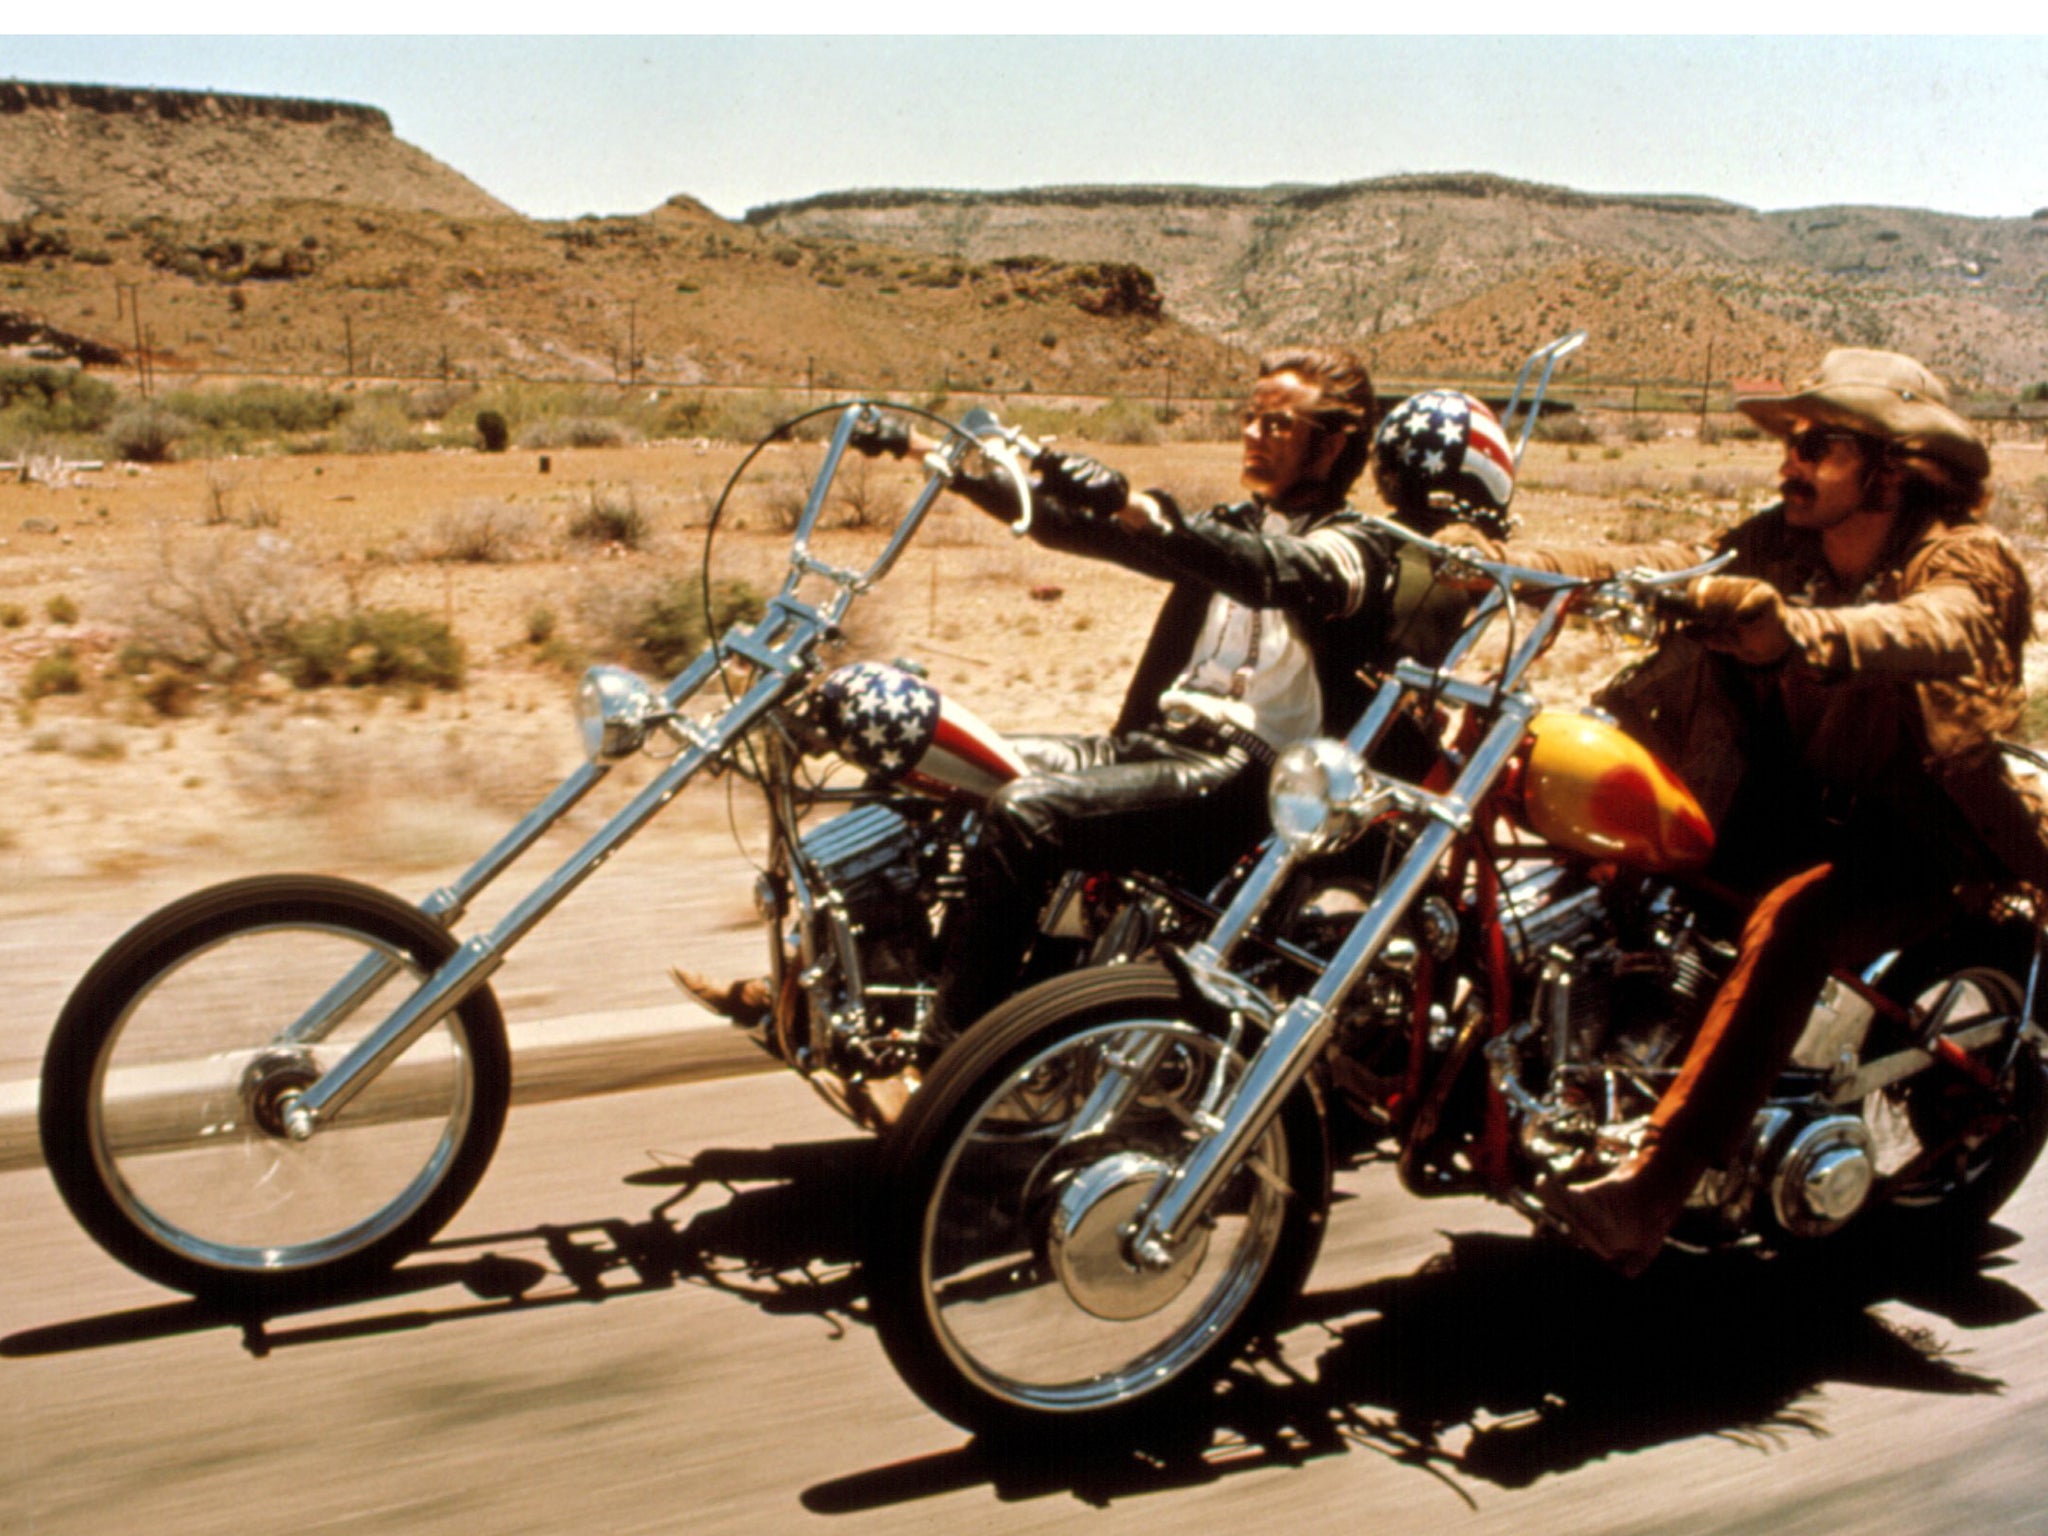 Easy Rider: 'We wanted to make a movie about... the experience of travelling across country with long hair’